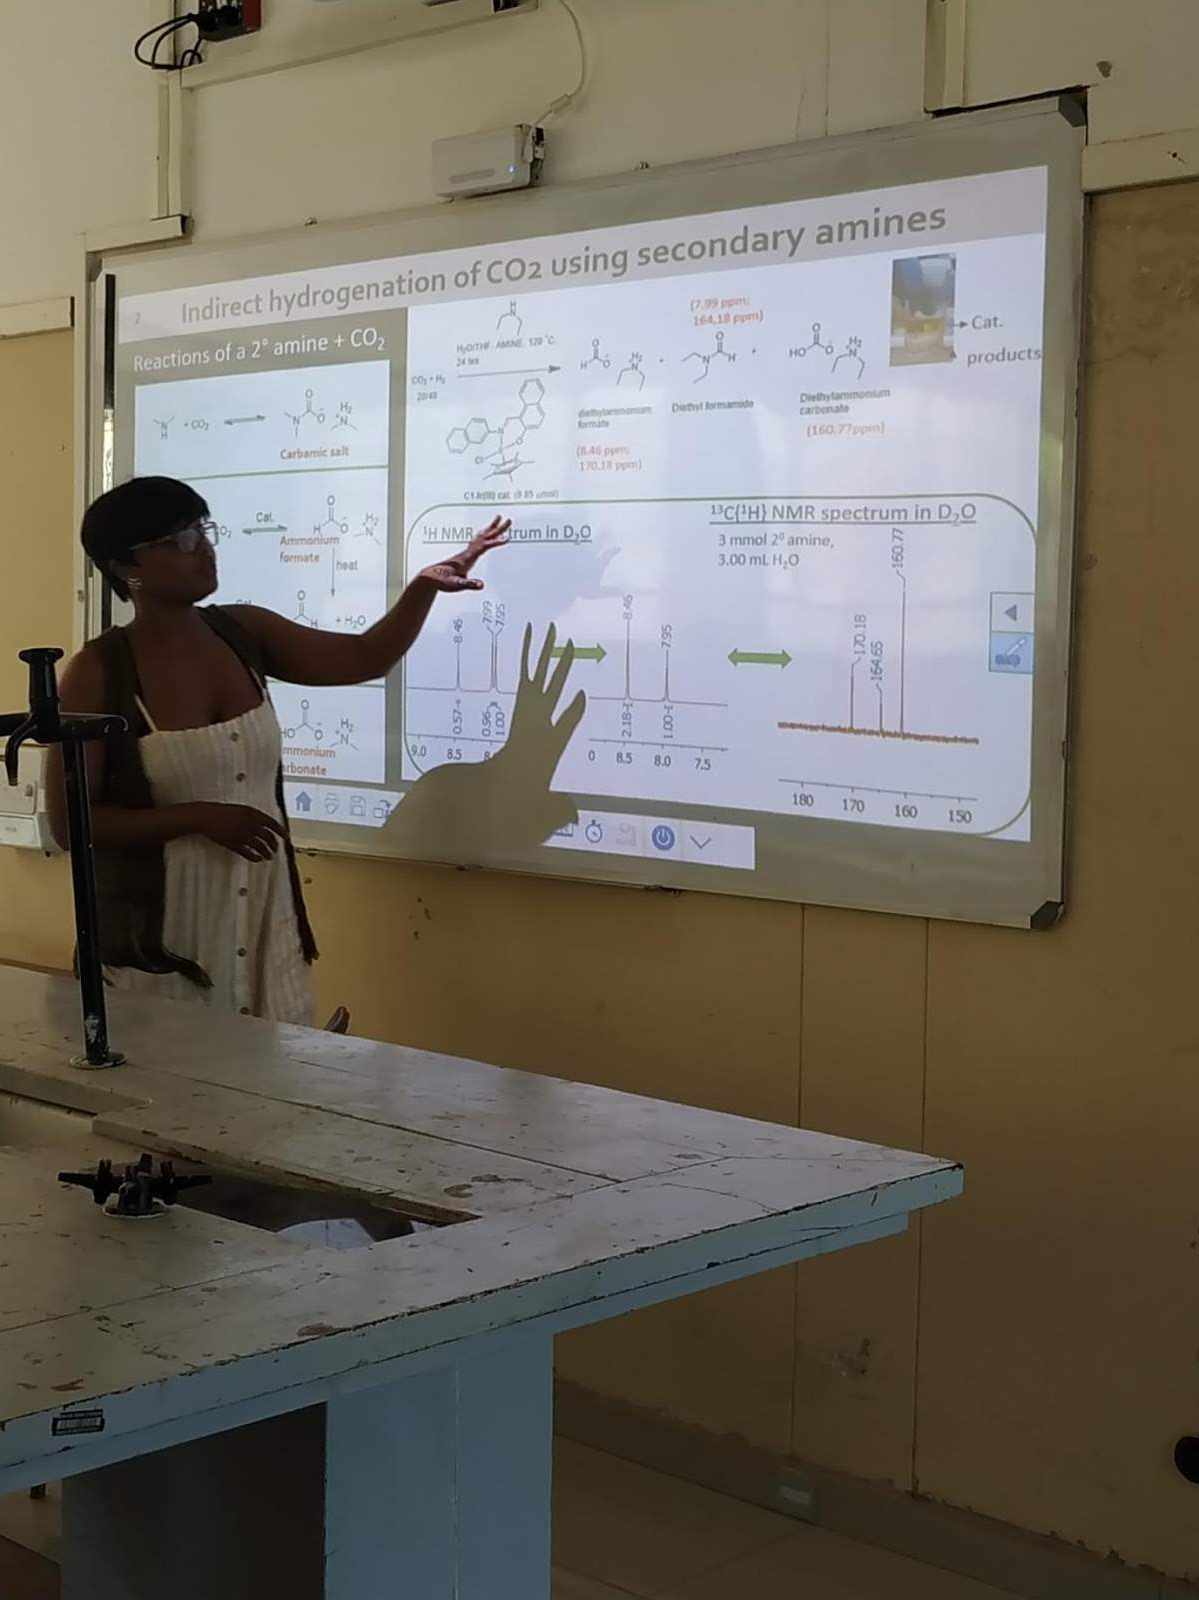 Siphe Malaza presenting her work on carbon dioxide hydrogenation, October 2019